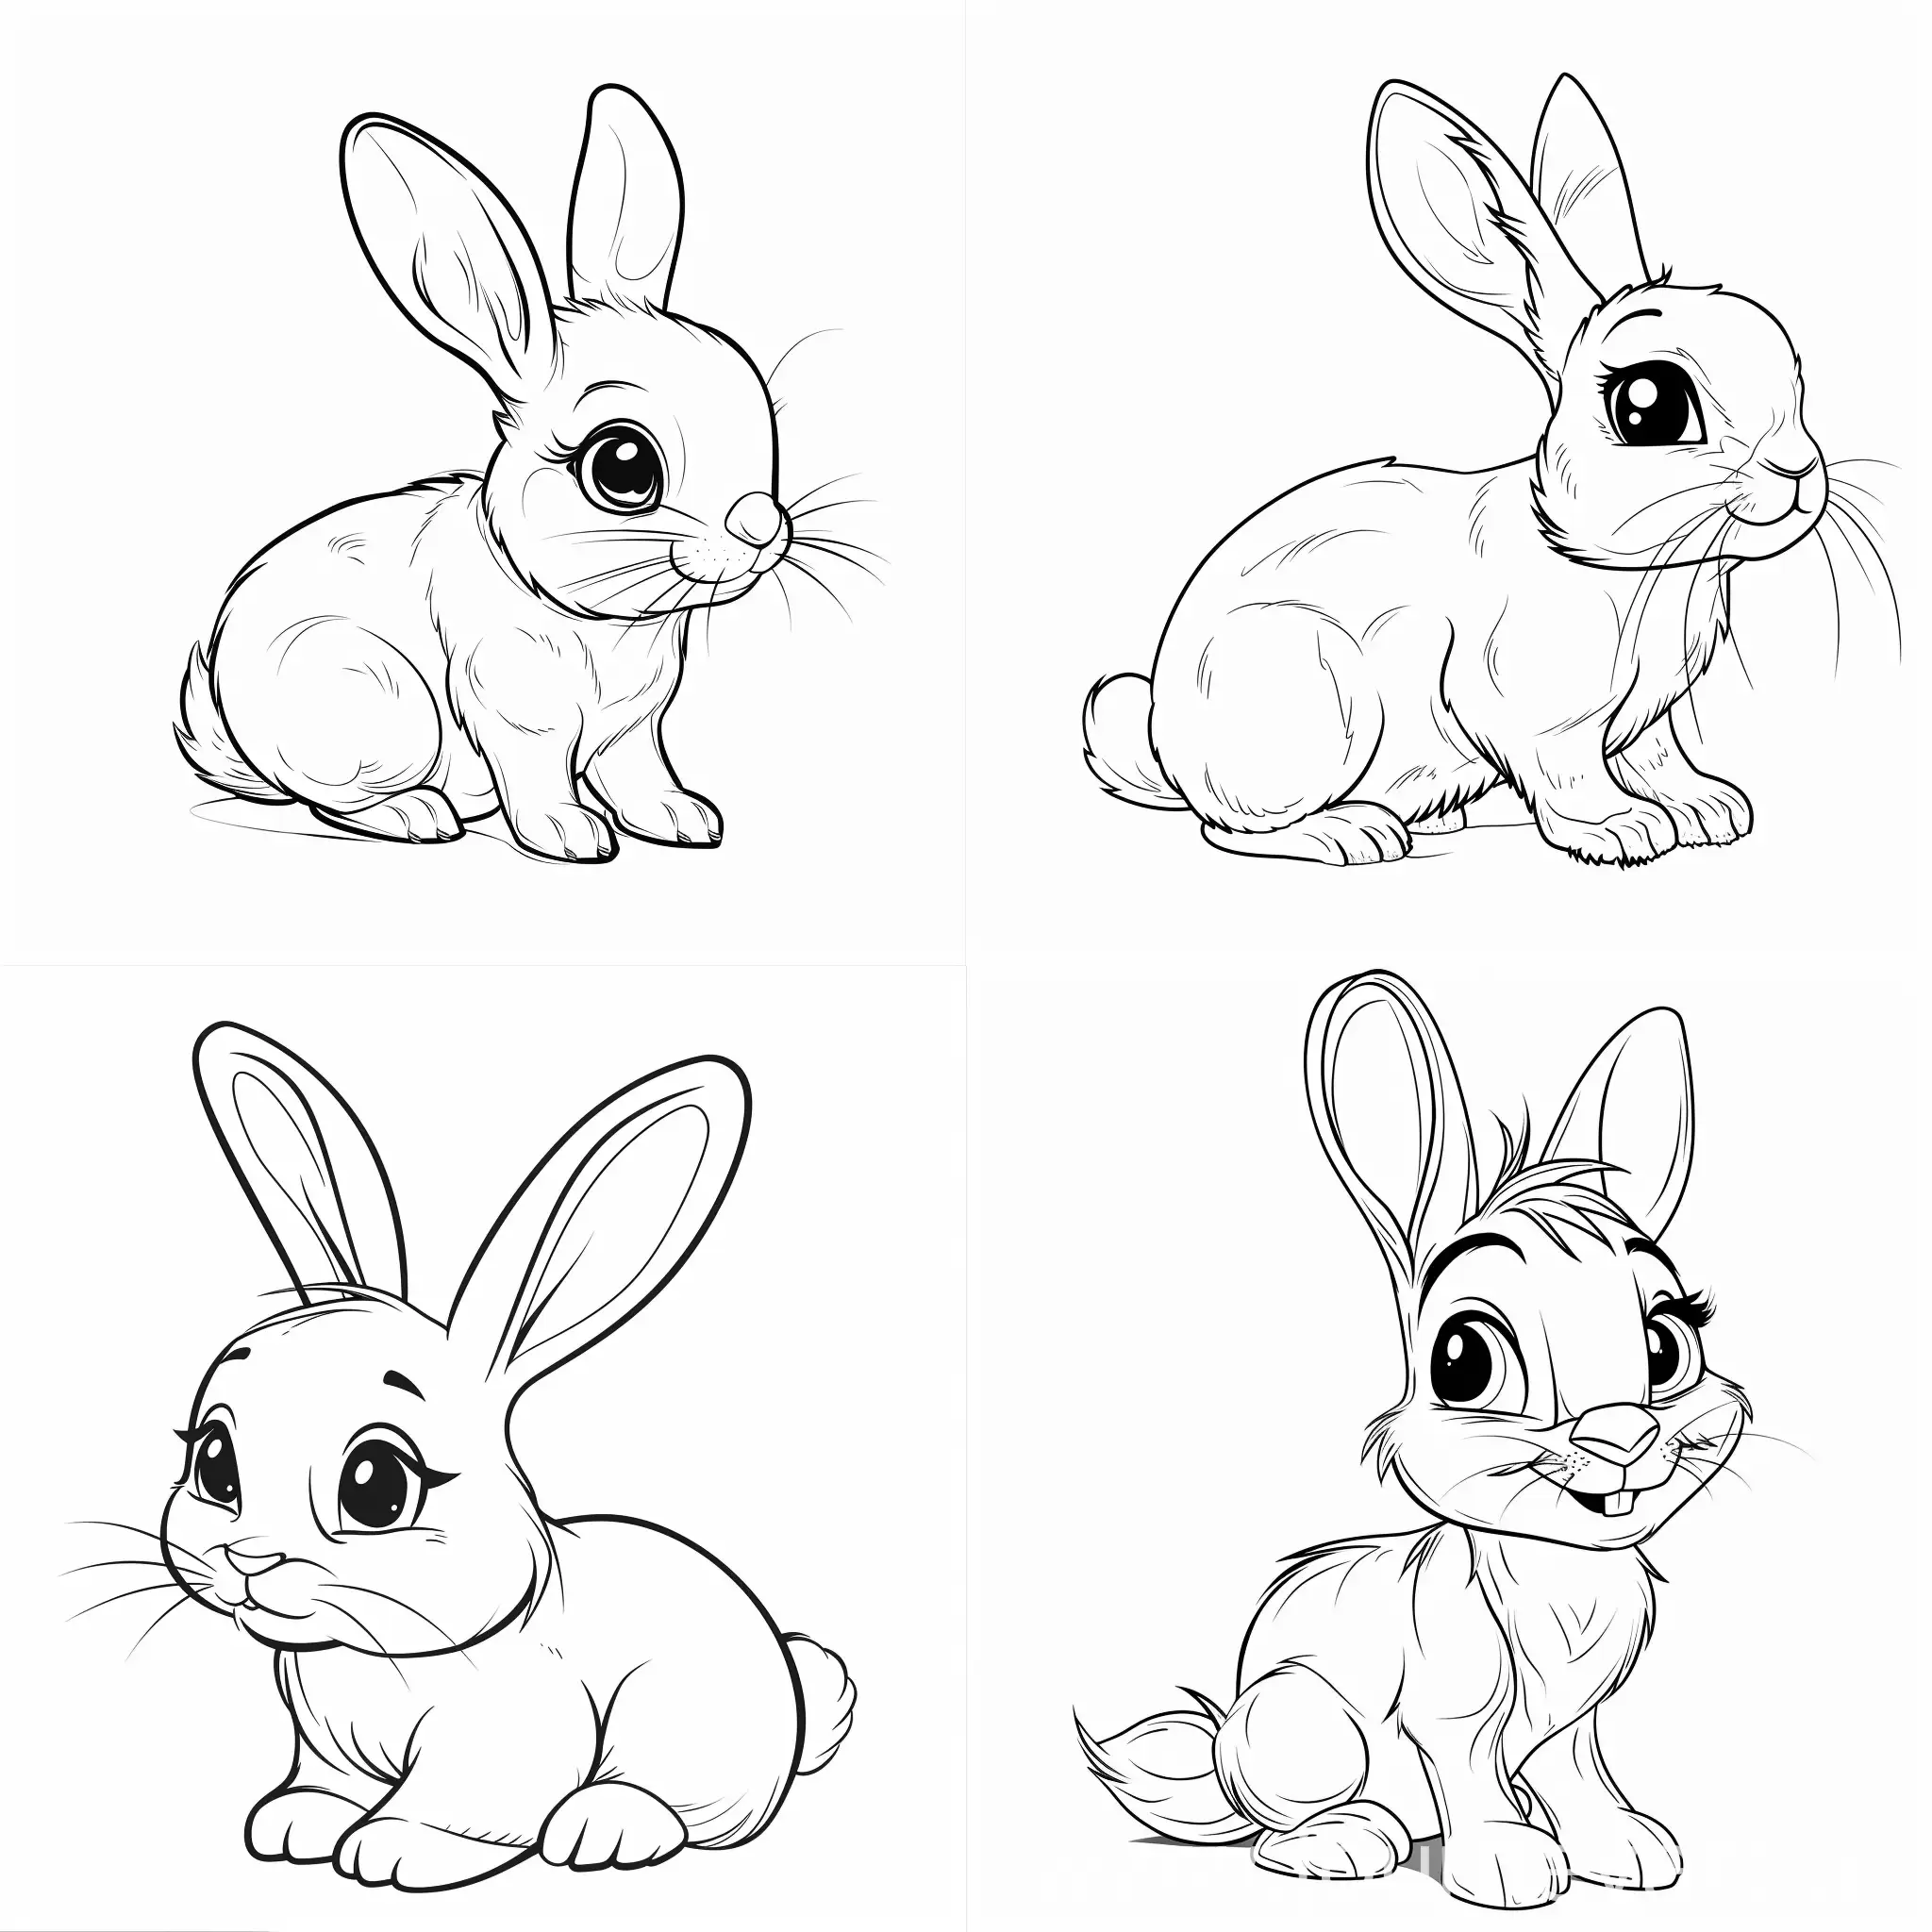 Adorable-Black-and-White-Rabbit-Coloring-Page-for-Childrens-Activity